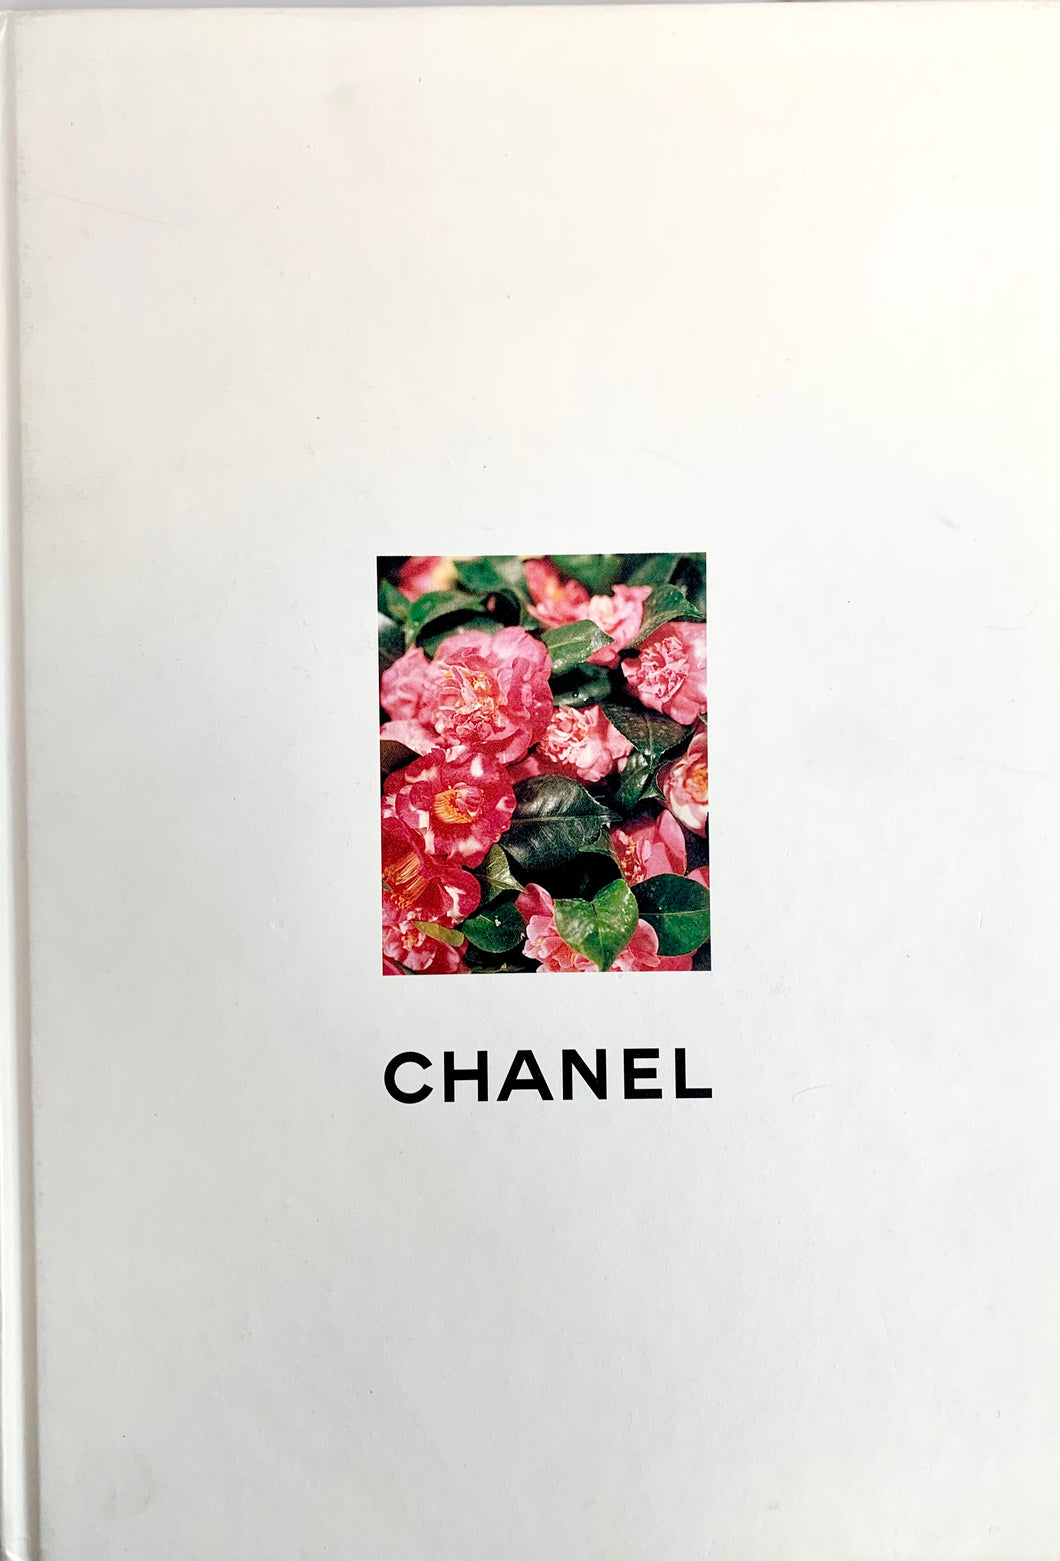 CHANEL 1995 ACCESSORIES COLLECTION HARDCOVER CATALOGUE